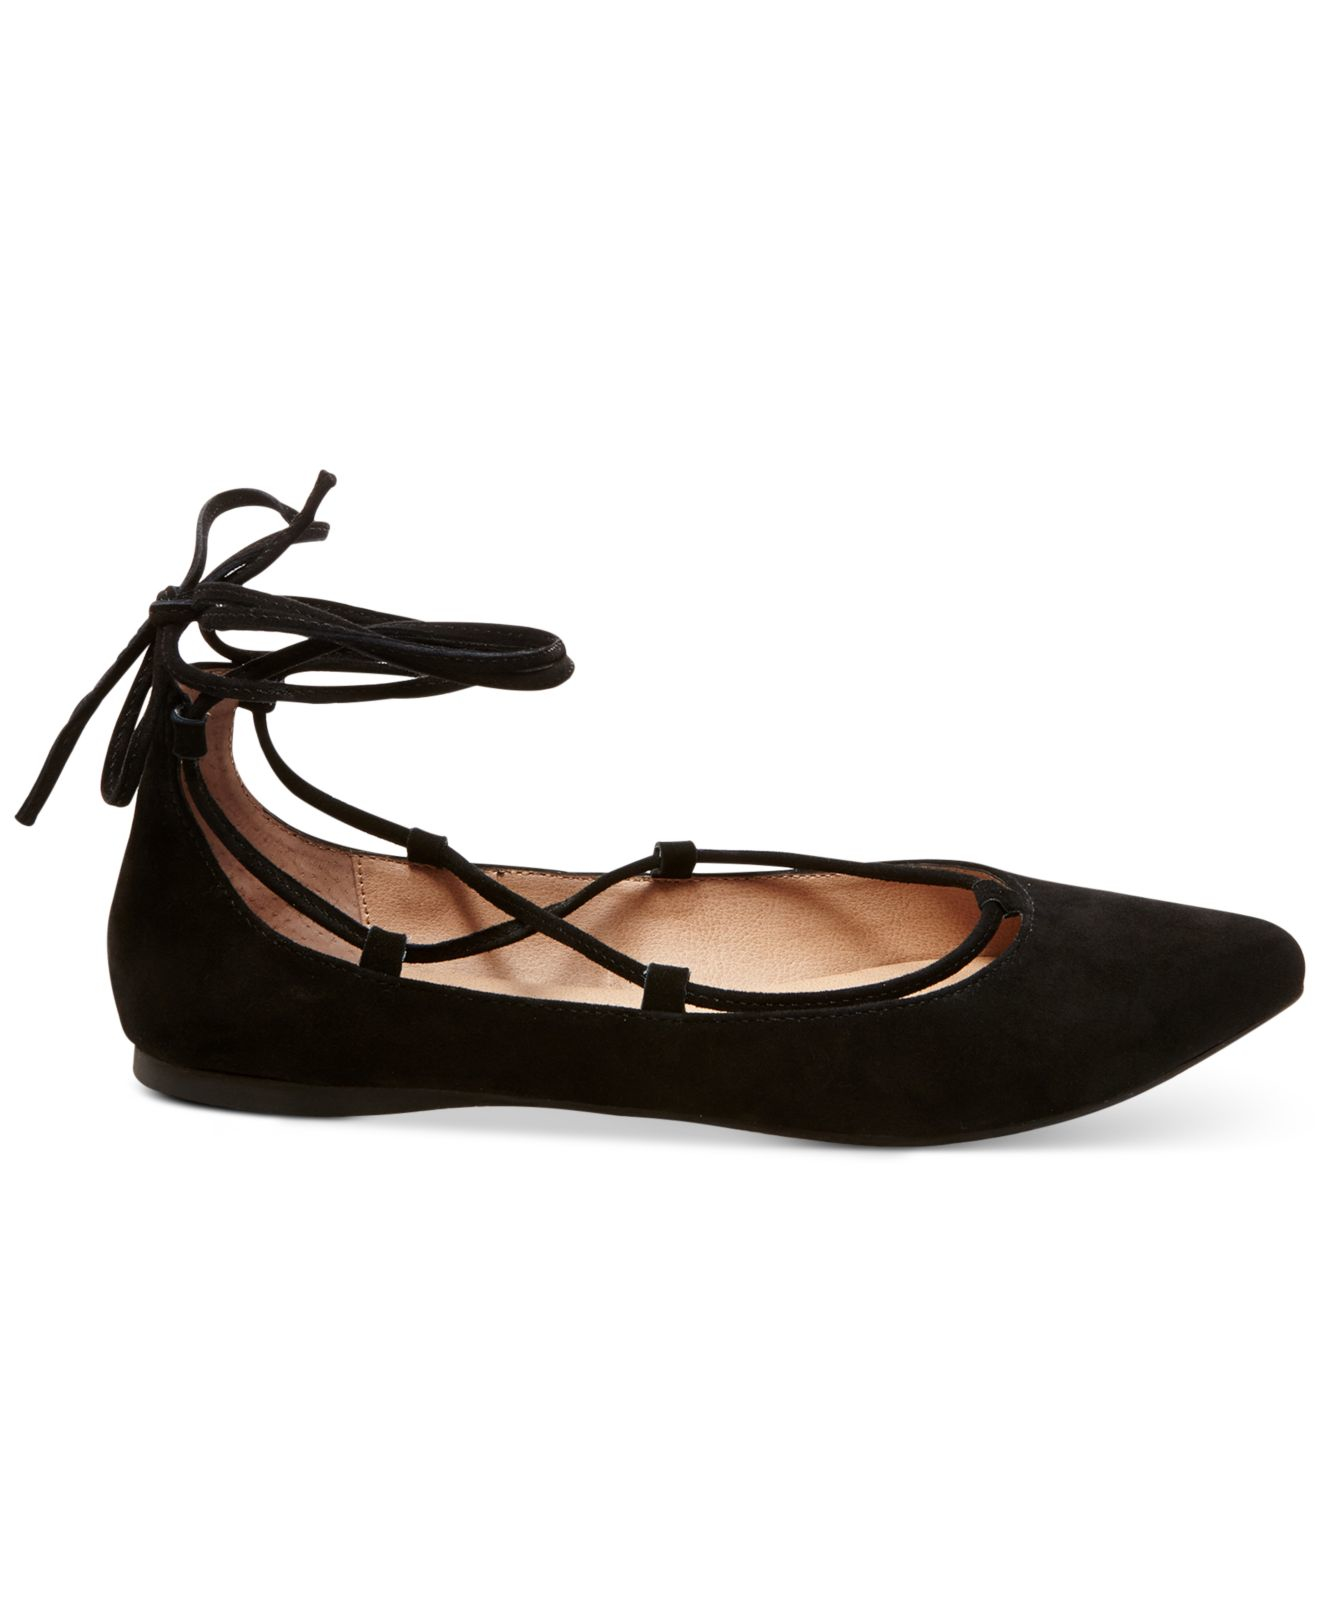 Steve Madden Eleanorr Suede Lace-up Flats in Black Suede (Black) - Lyst